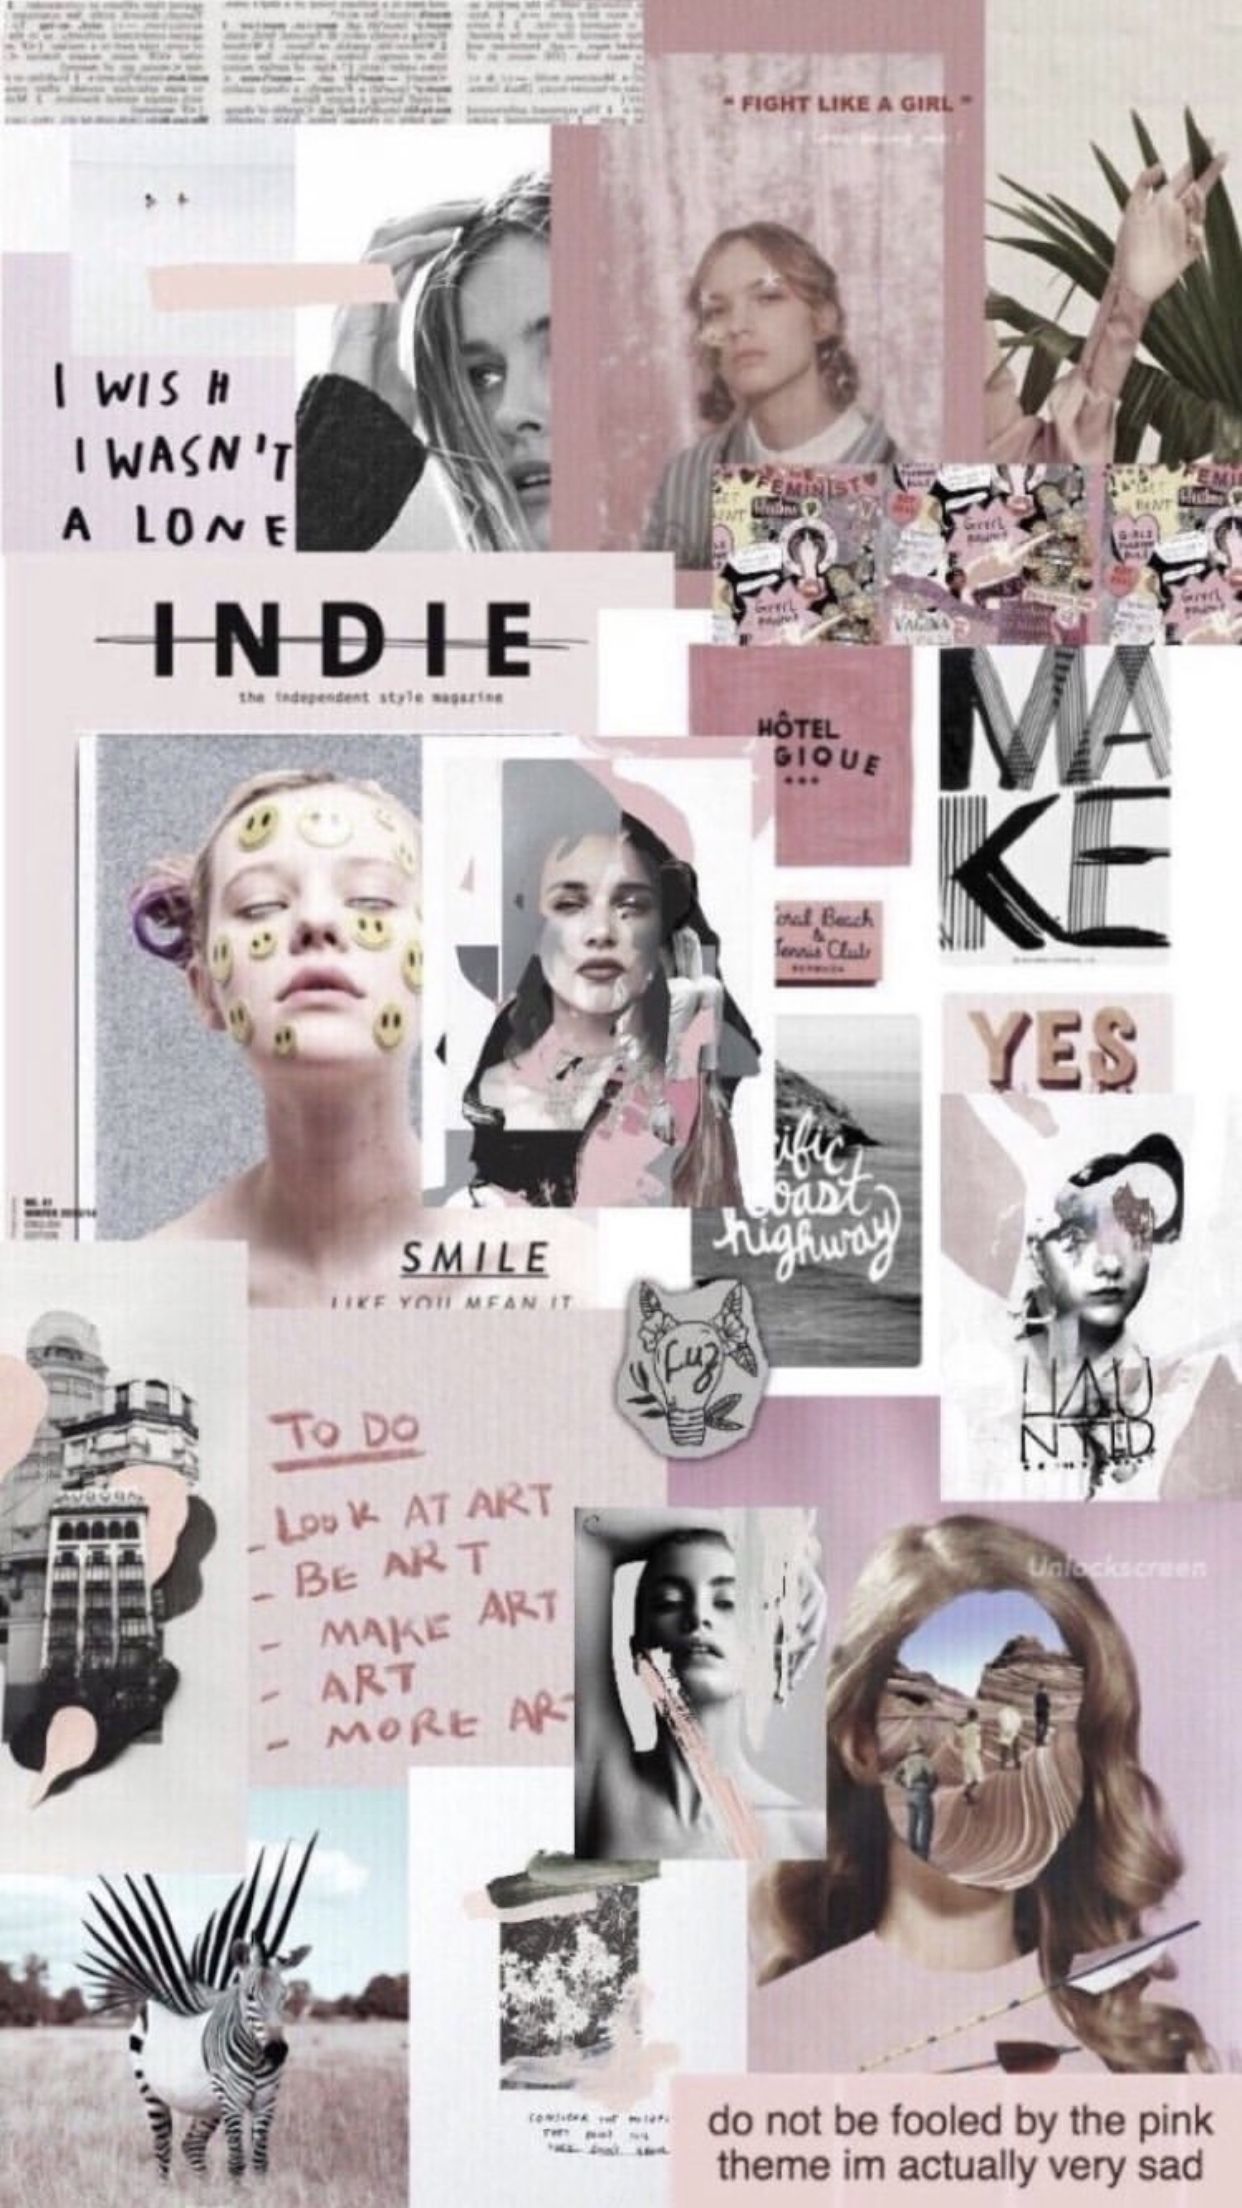 A collage of photos and words including a girl with her eyes closed, the word smile, a zebra, and the word art. - Fashion